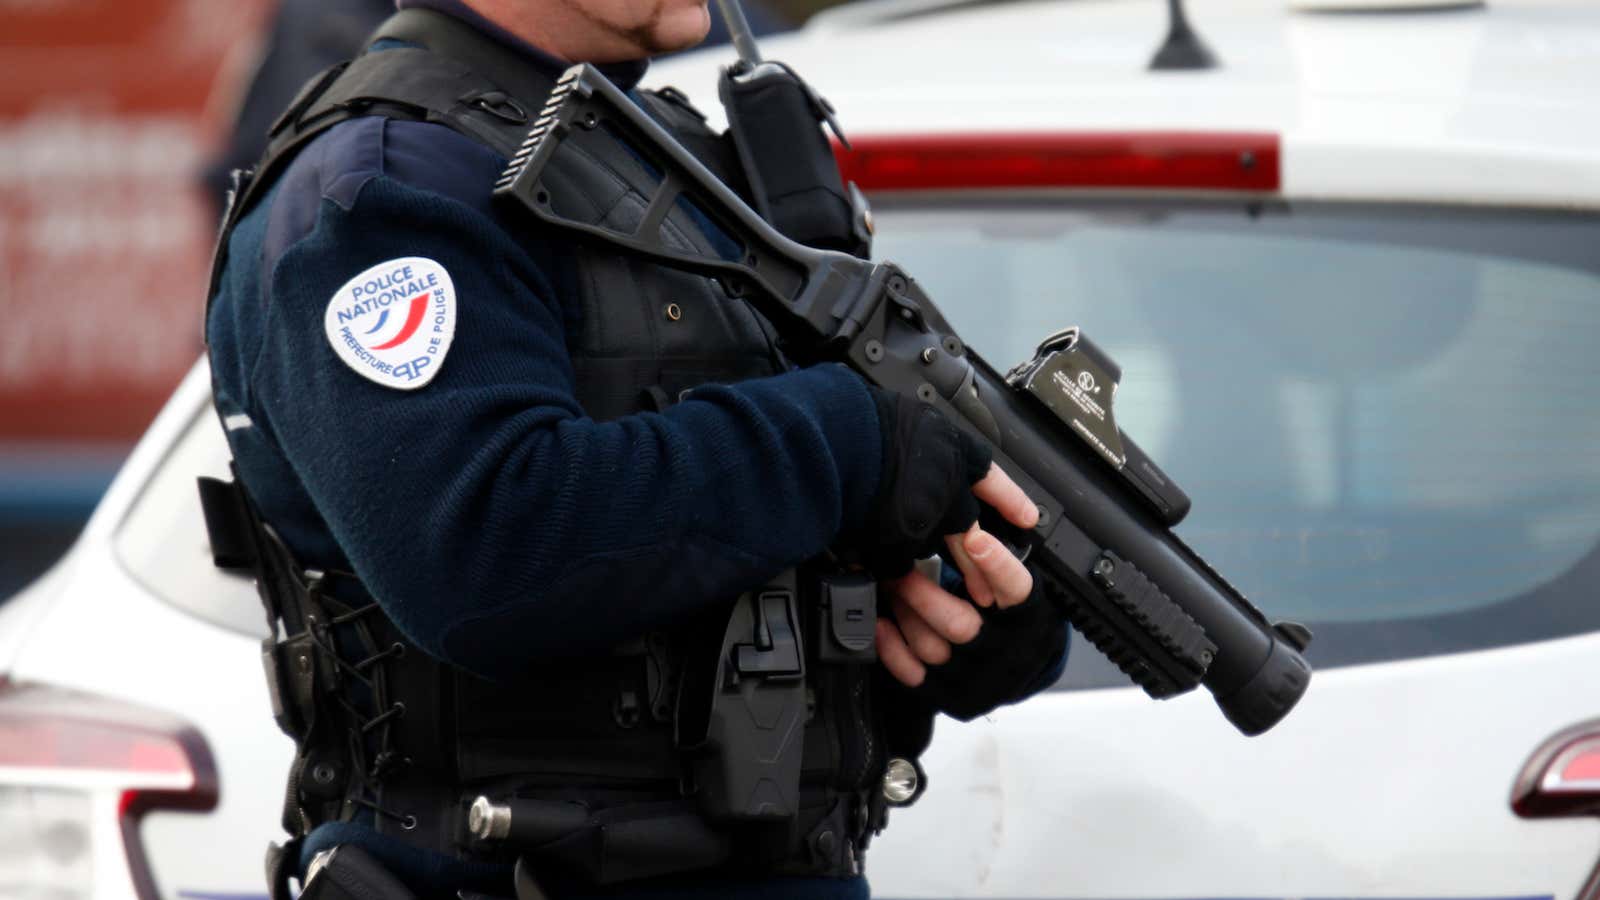 French police were on the scene after a teacher was stabbed at an Aubervilliers school this morning.